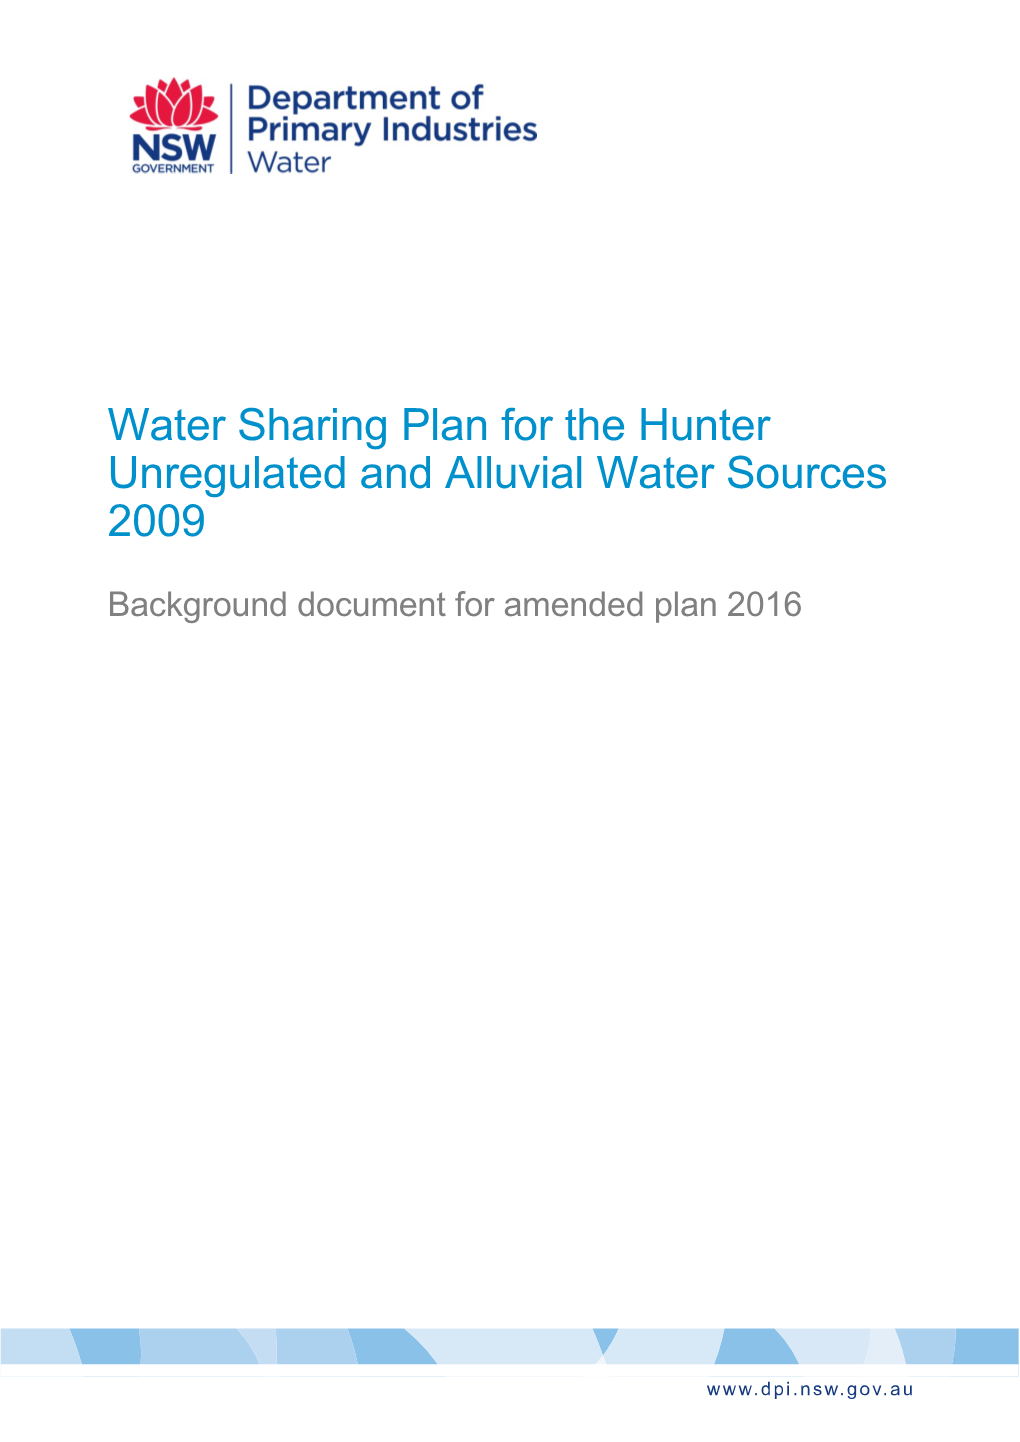 Hunter Unregulated and Alluvial Water Sources 2009